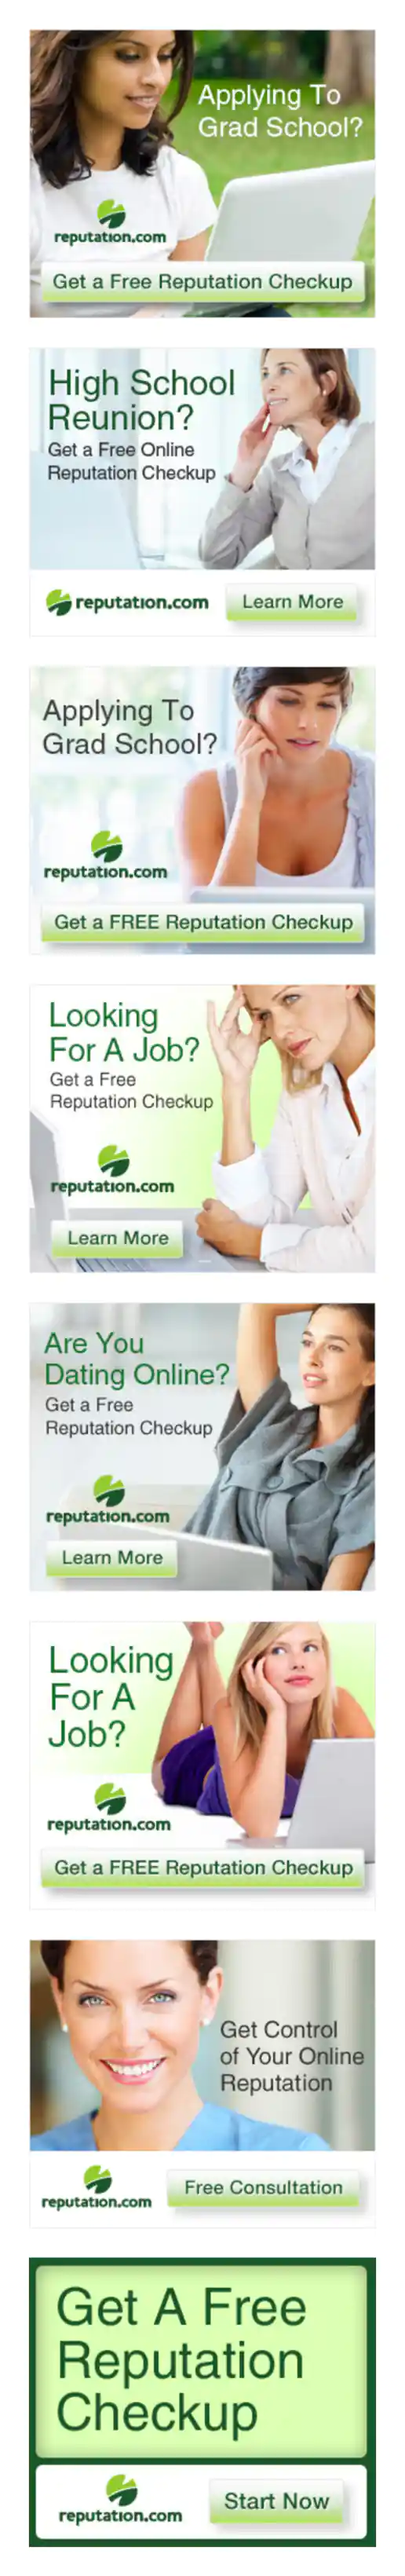 Reputation.com Free Checkup Positive Message Banners project image